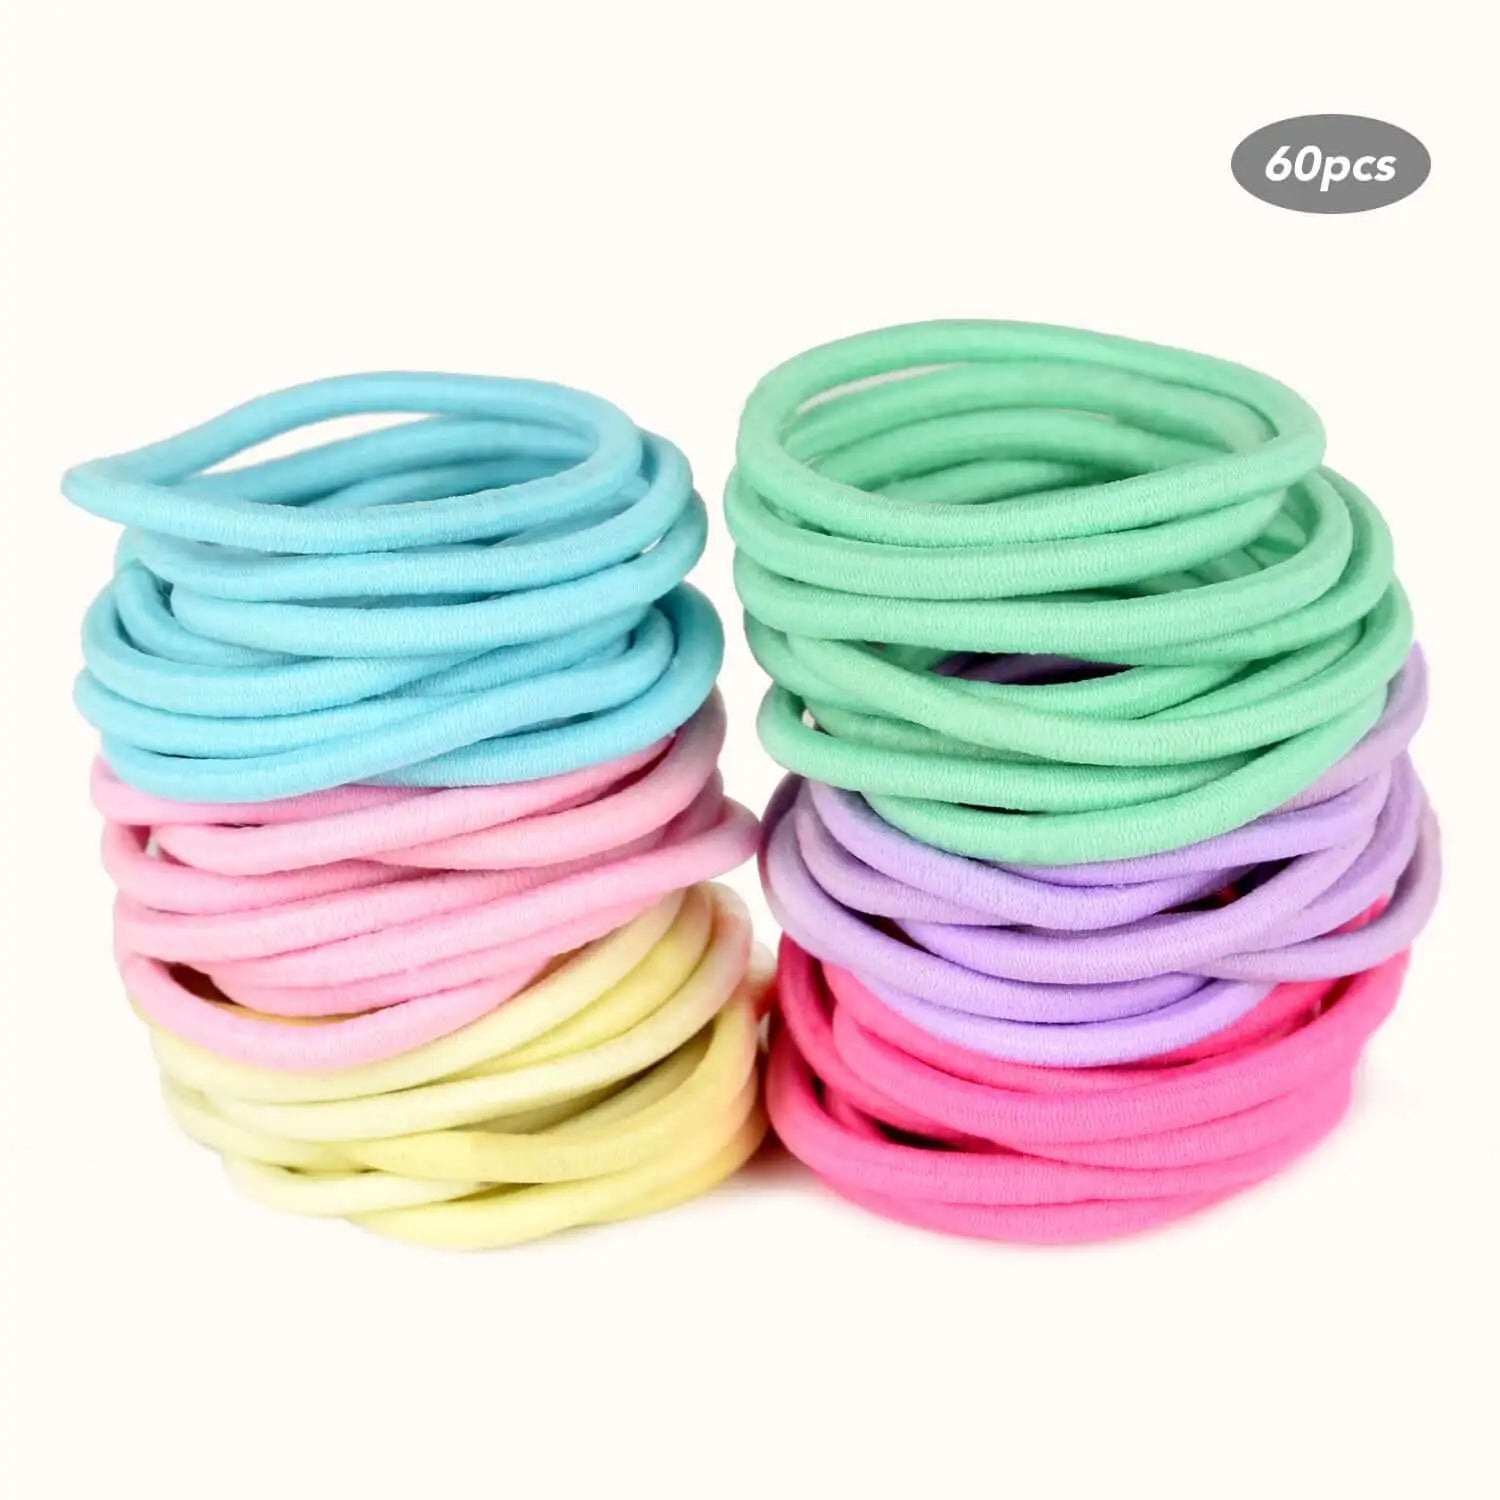 Pastel colored 3mm soft elastic hair ties - 60 pieces